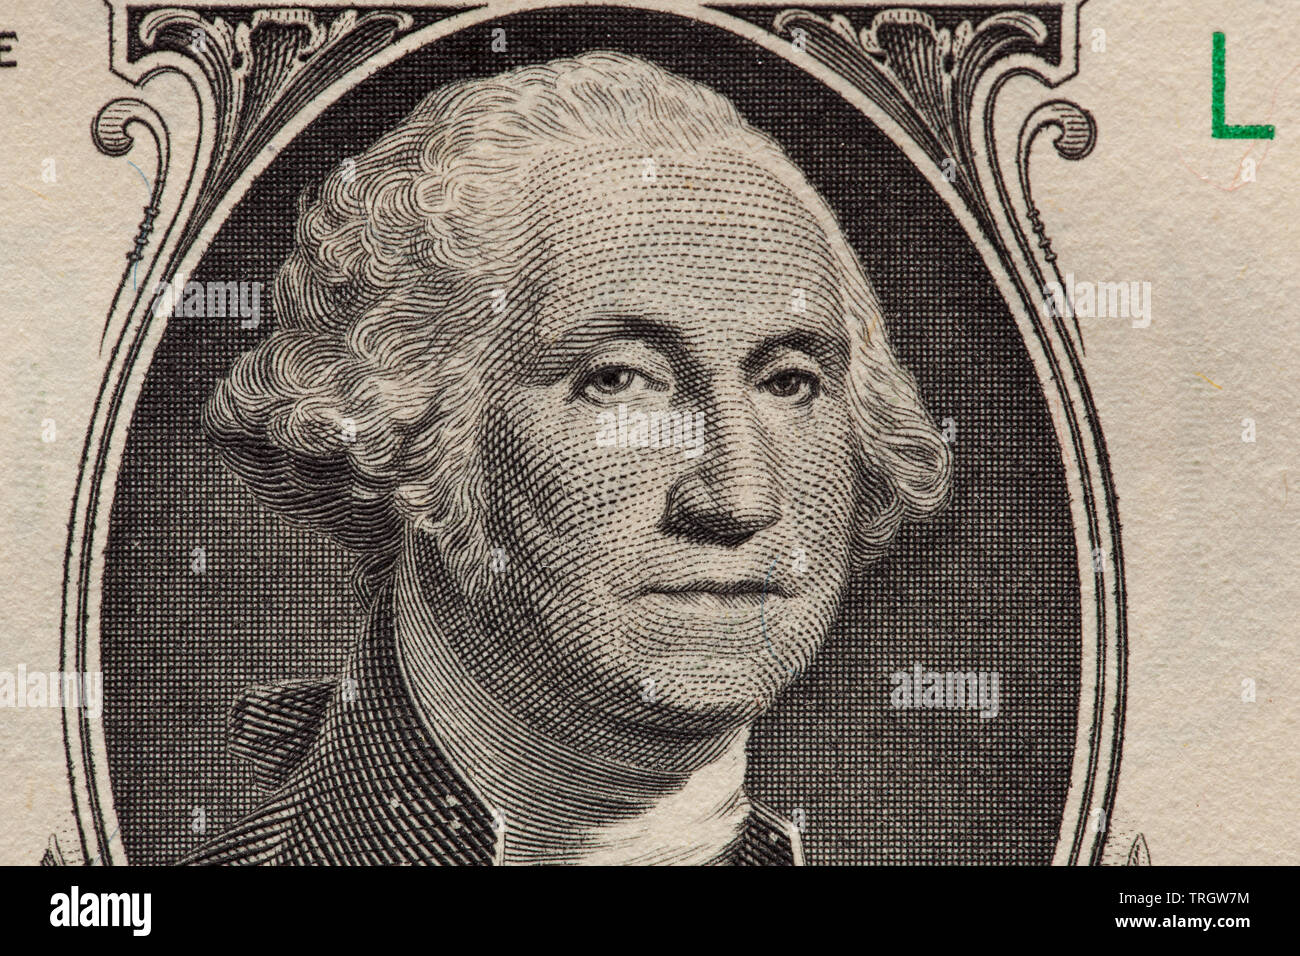 George Washington Dollar High Resolution Stock Photography And Images Alamy